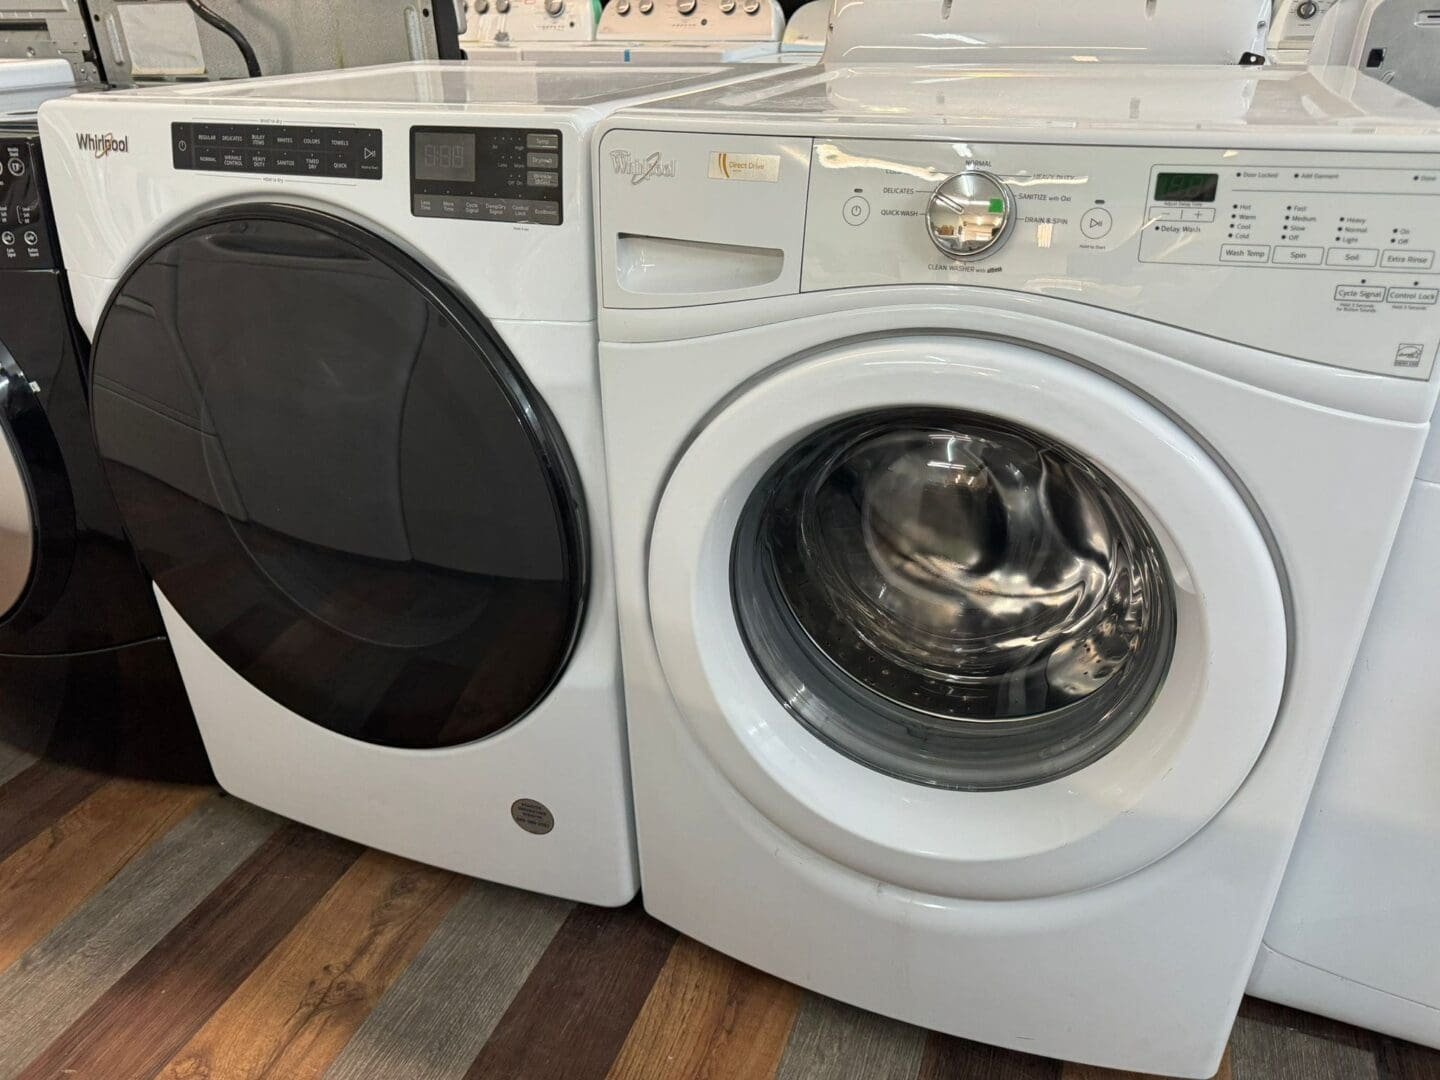 Whirlpool Refurbished Front Load Washer Dryer Set – White